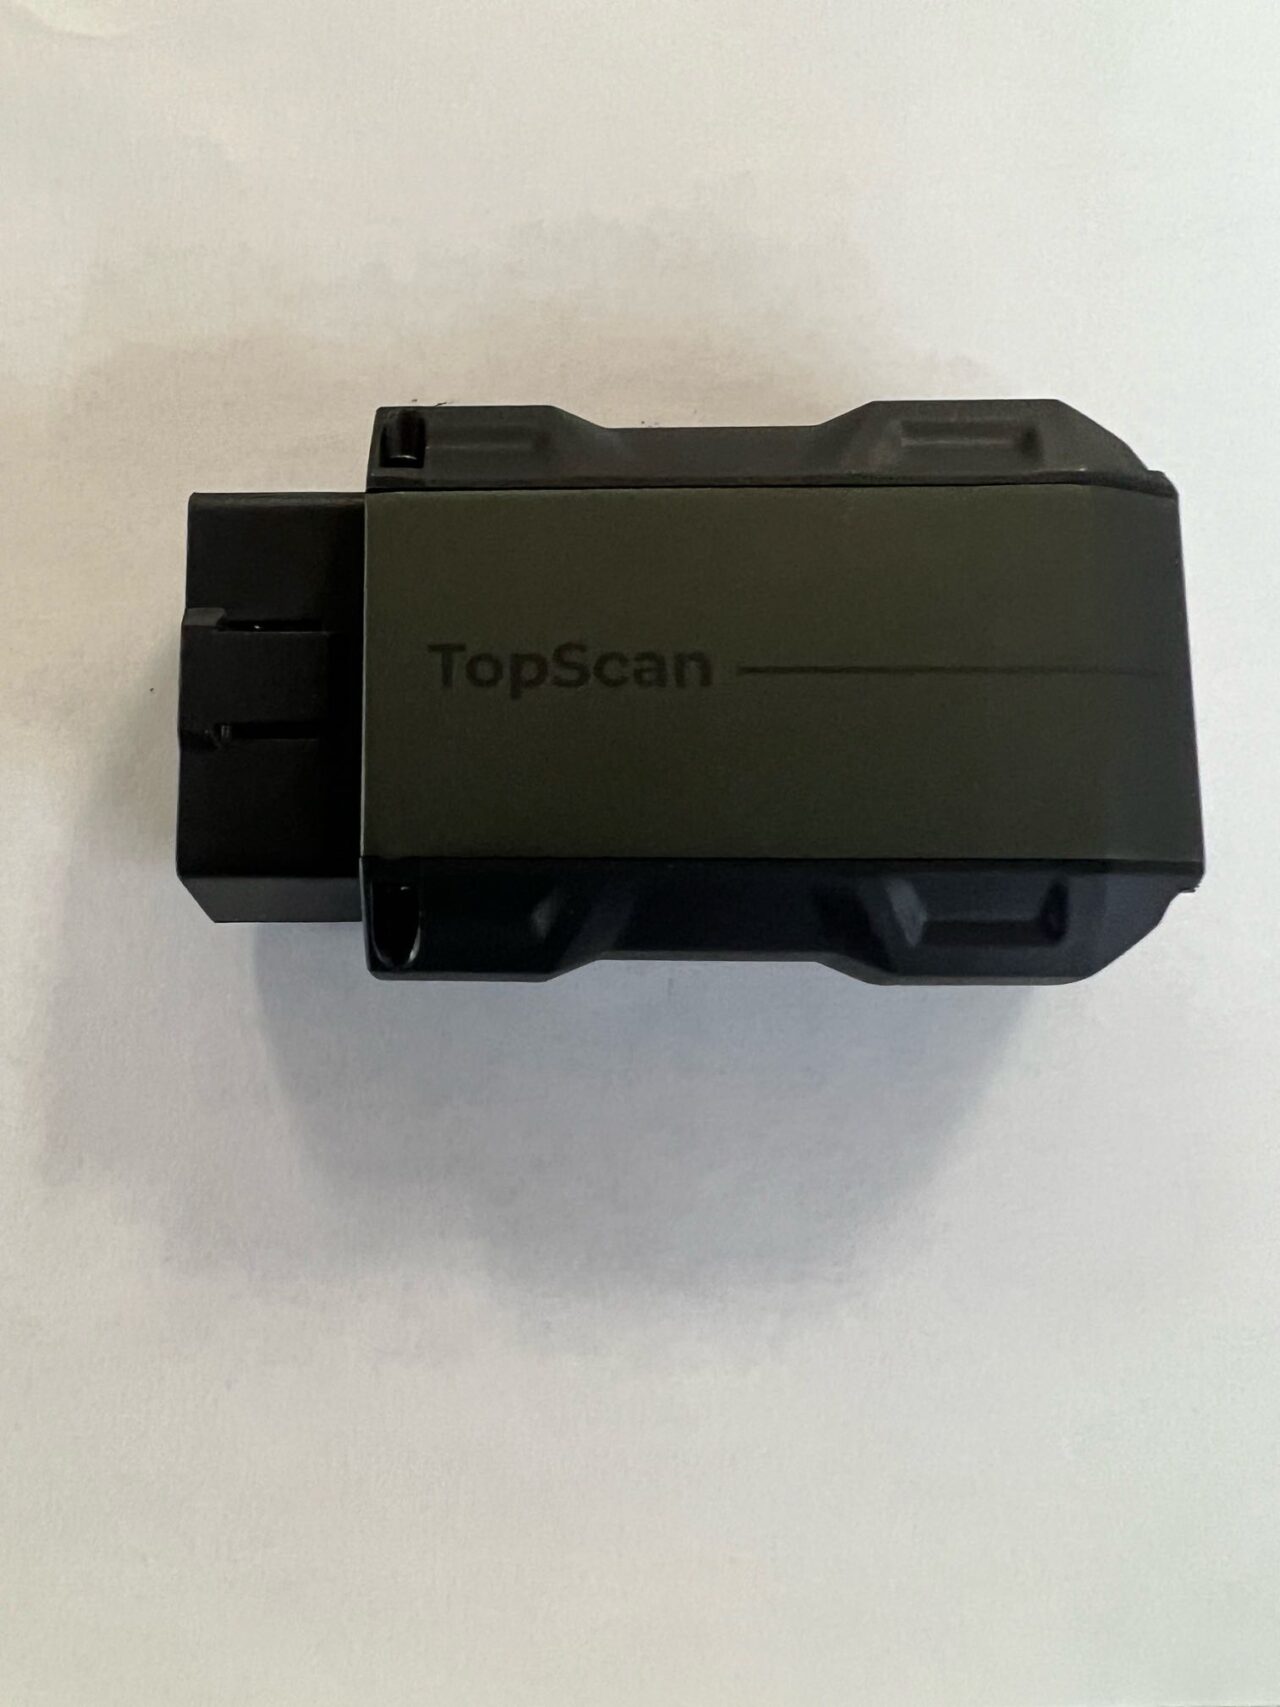 TOPDON TopScan unboxing